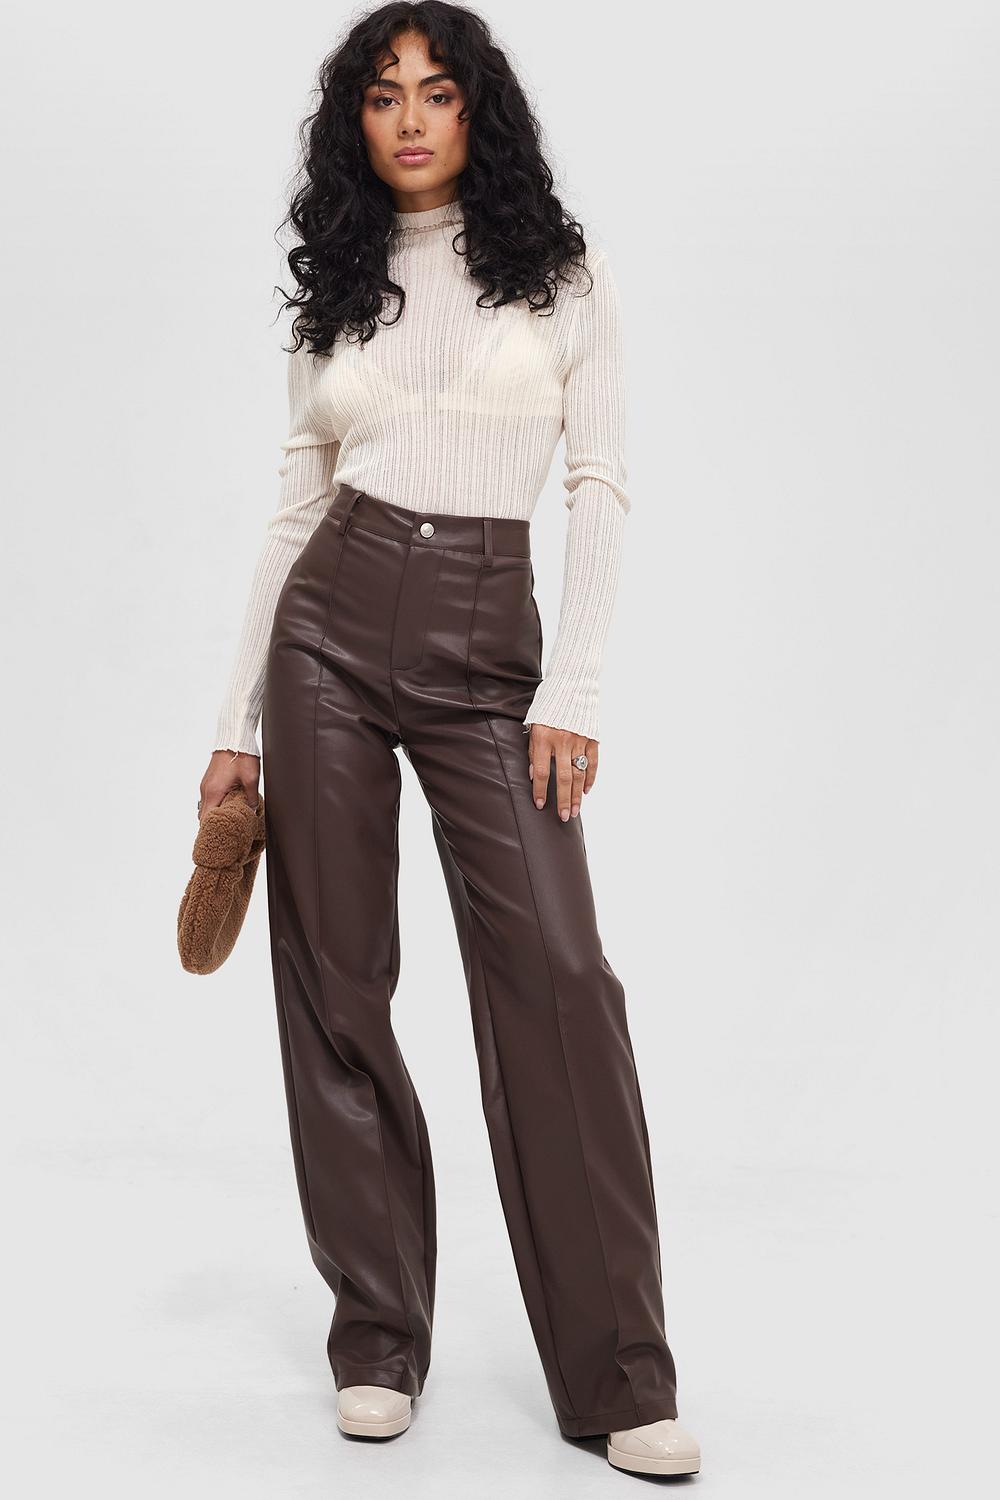 Brown PU leather trousers